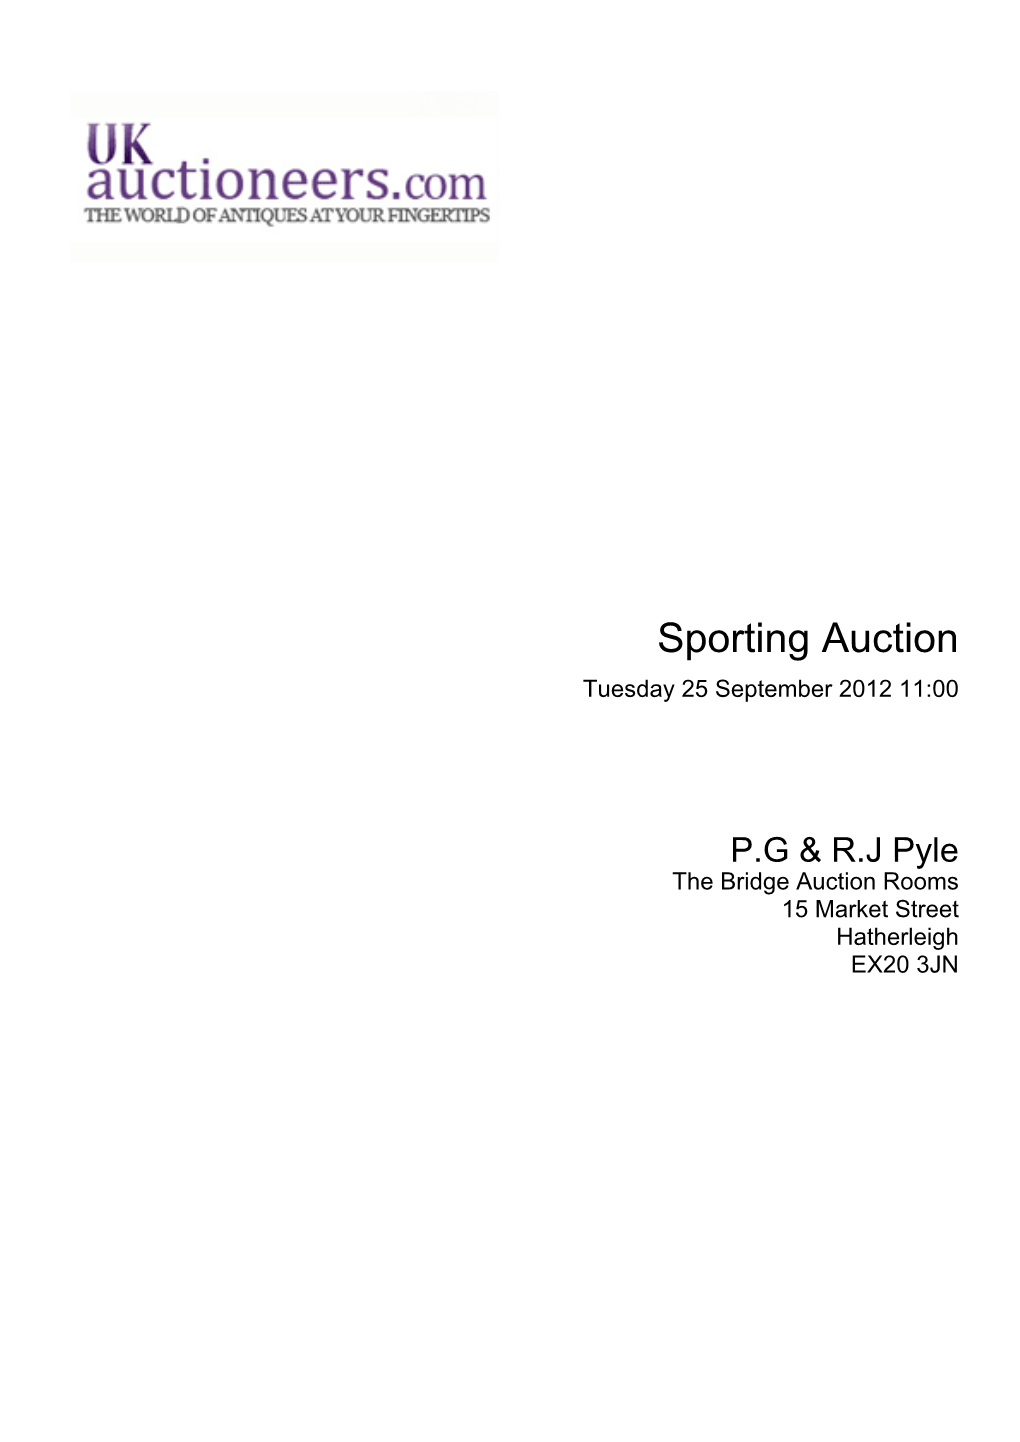 Sporting Auction Tuesday 25 September 2012 11:00